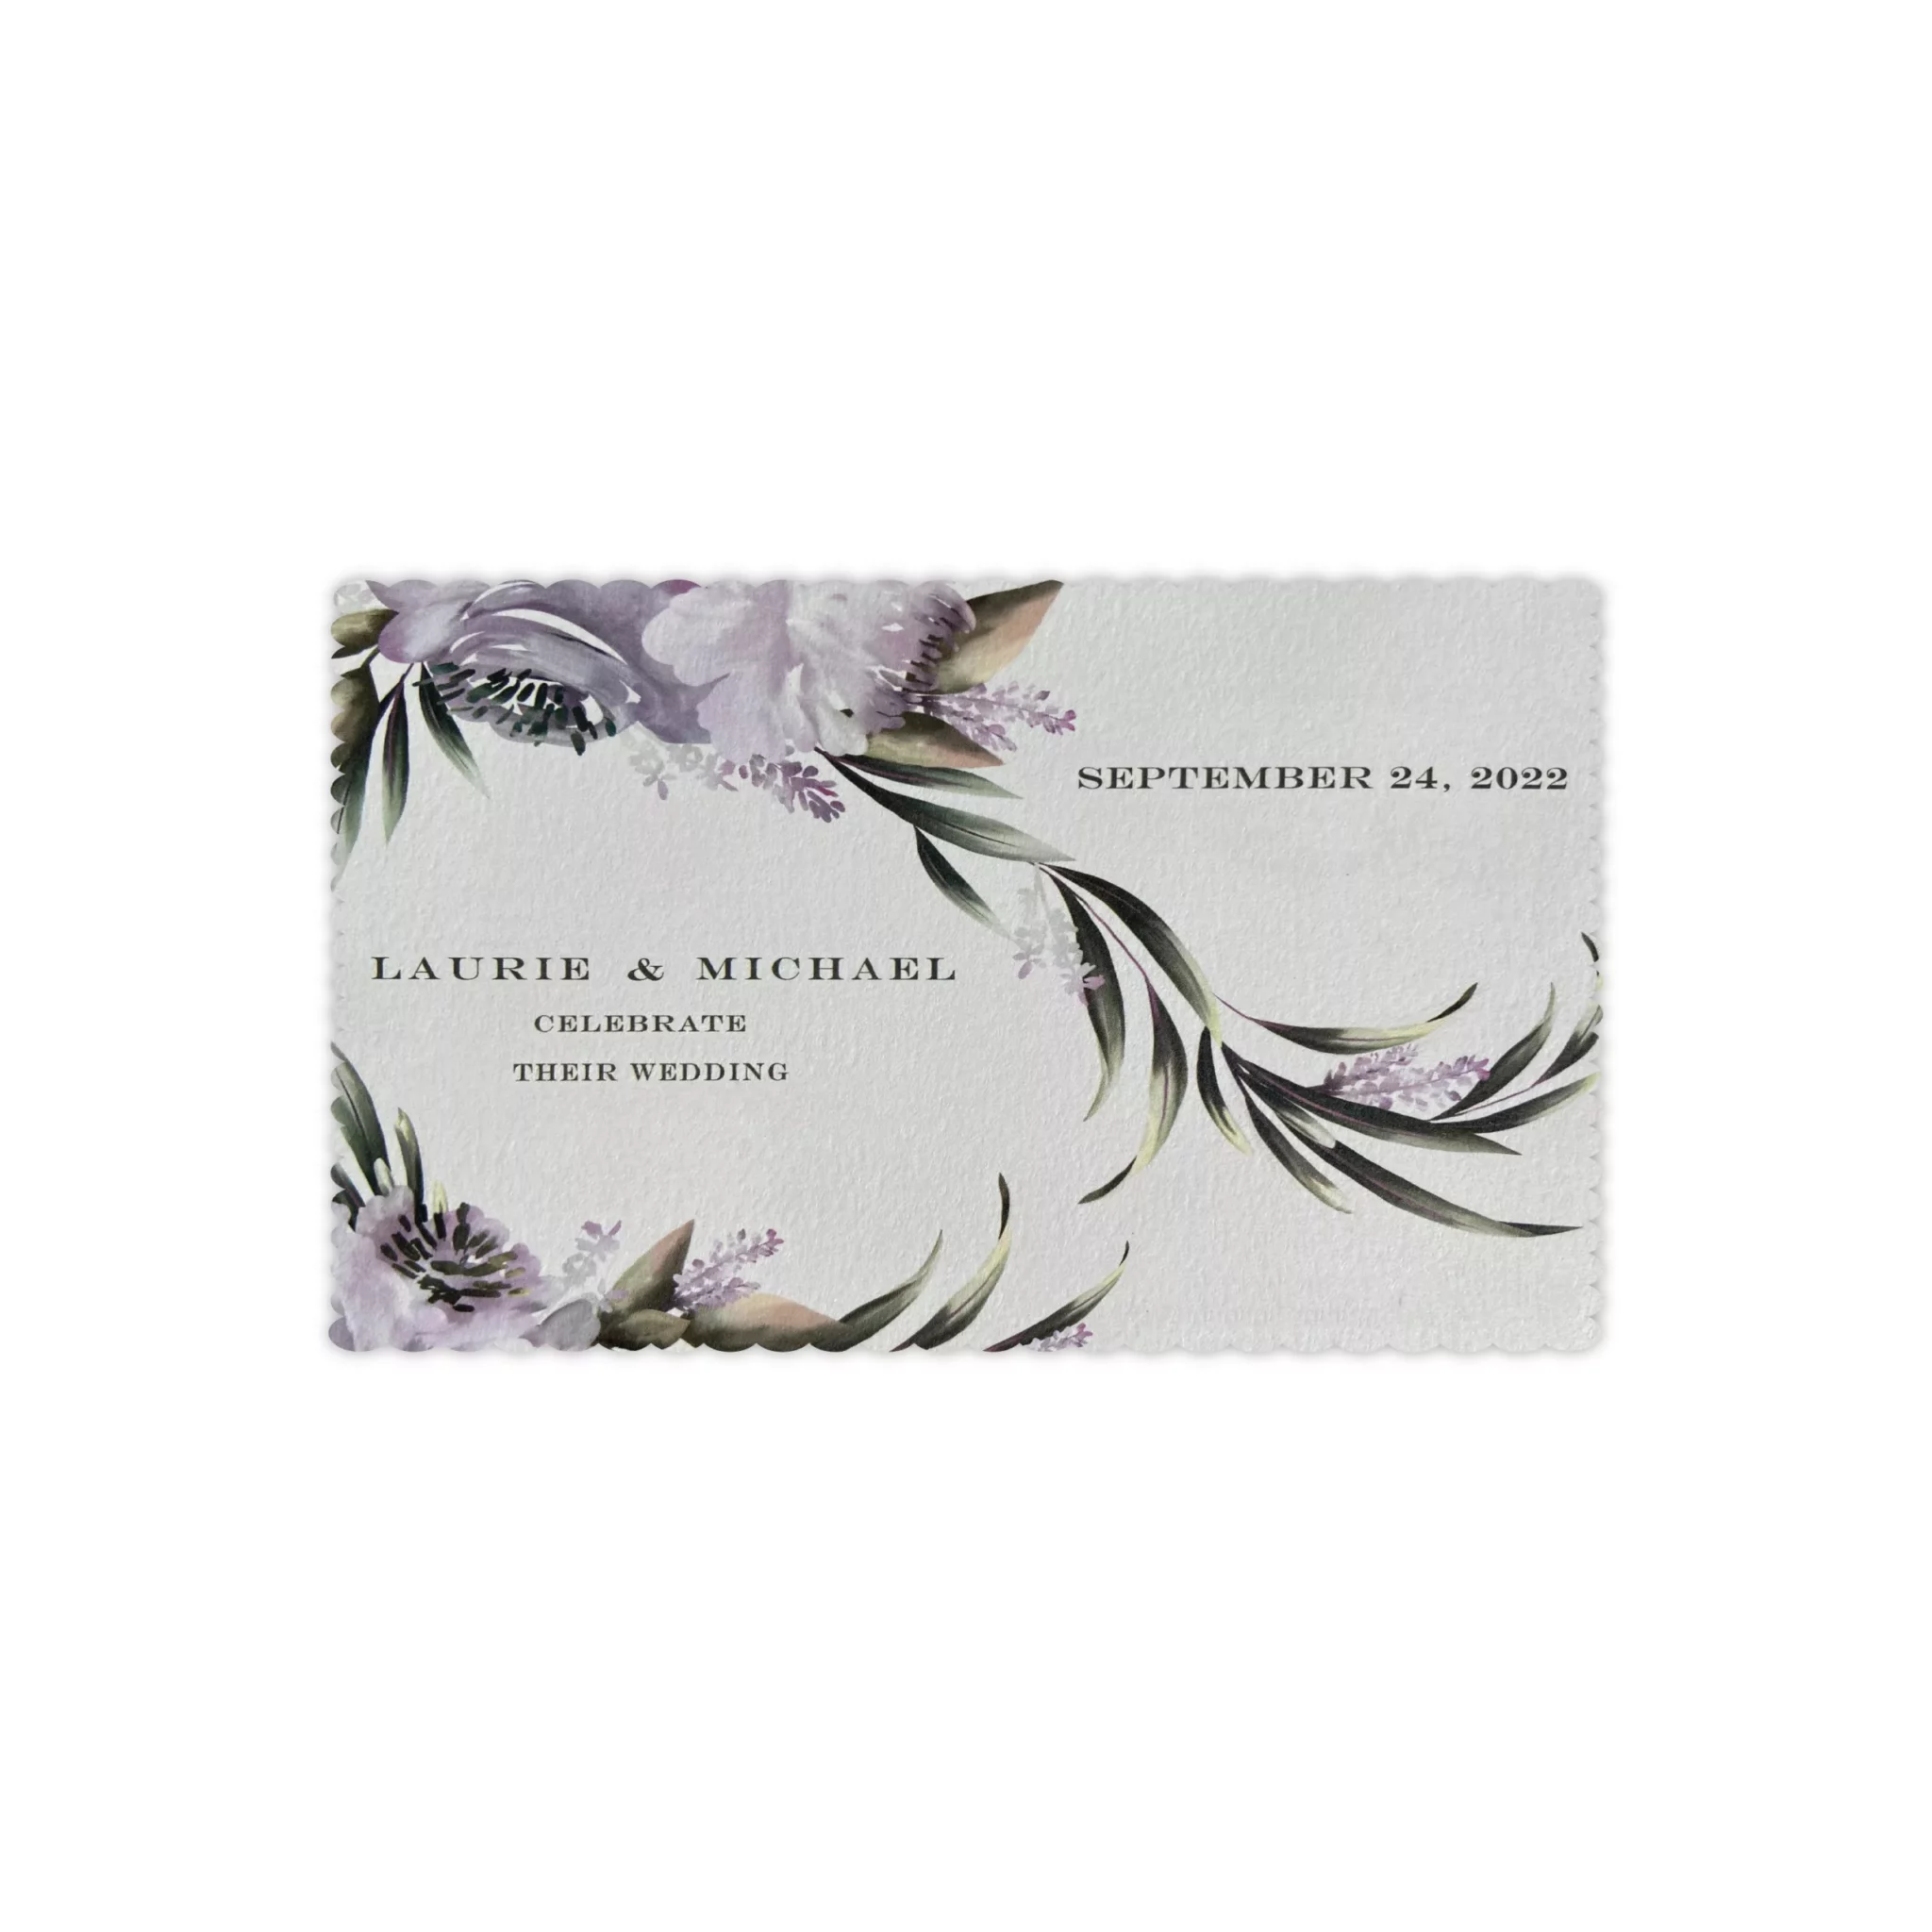 Laurie & Michael Wedding Giveaway Cloth